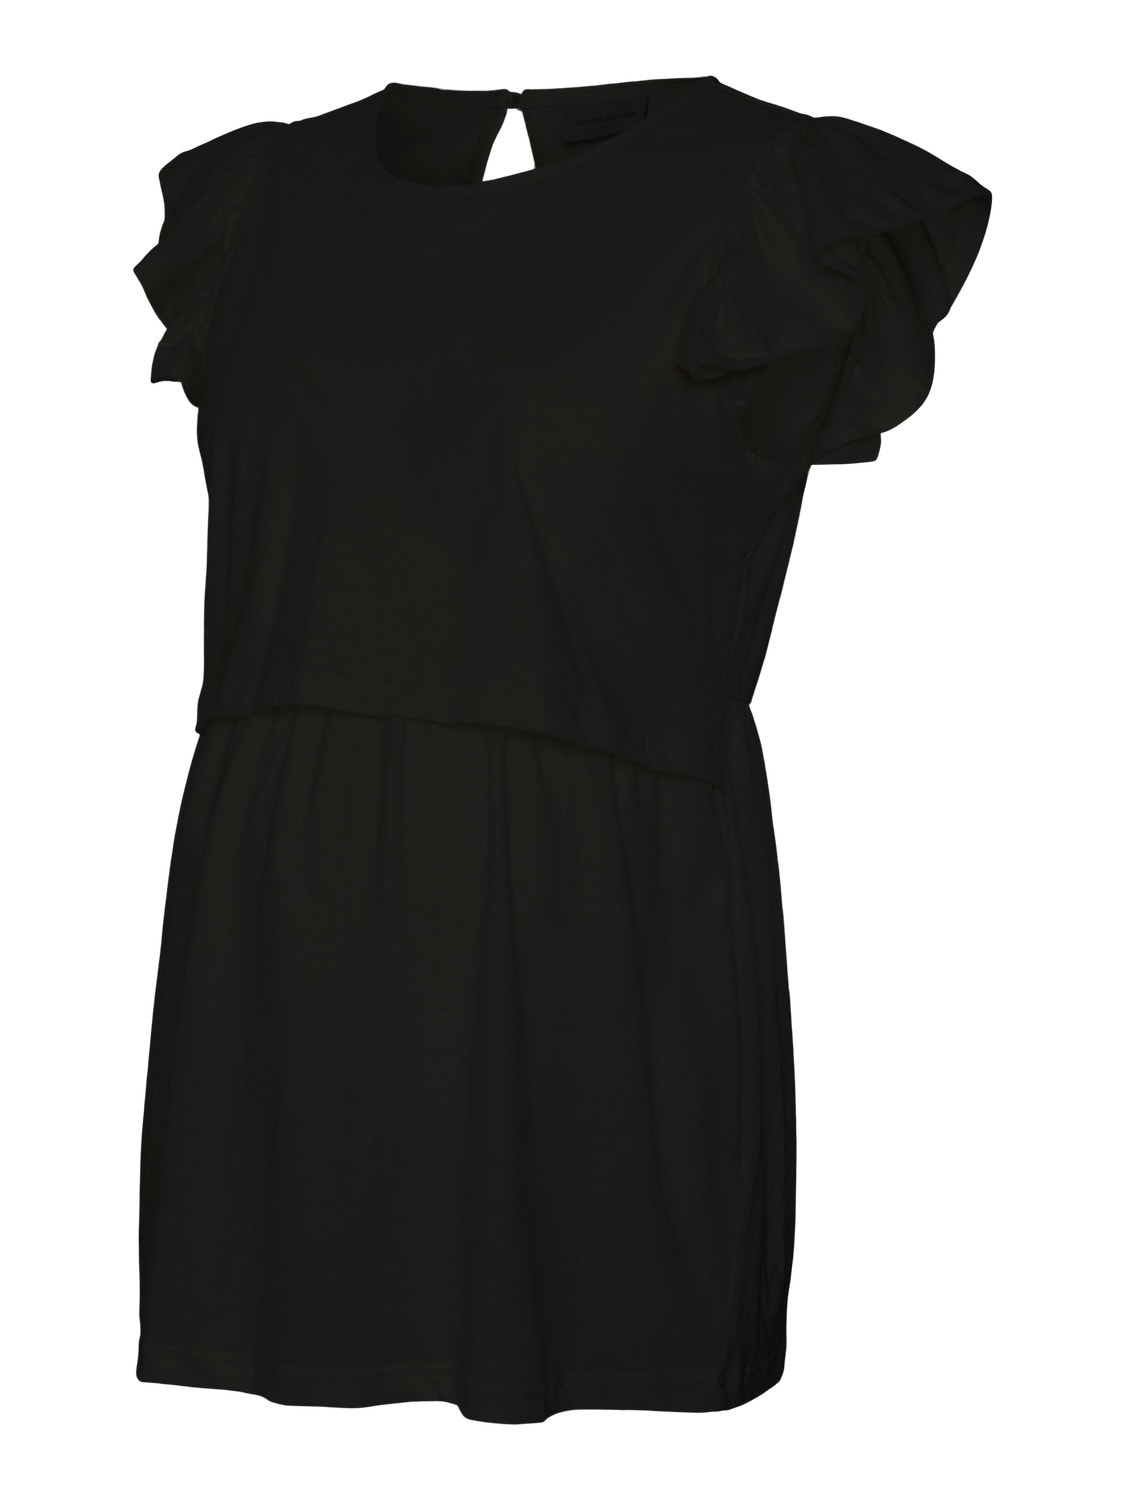 MAMA.LICIOUS Umstands-top -Black - 20020492